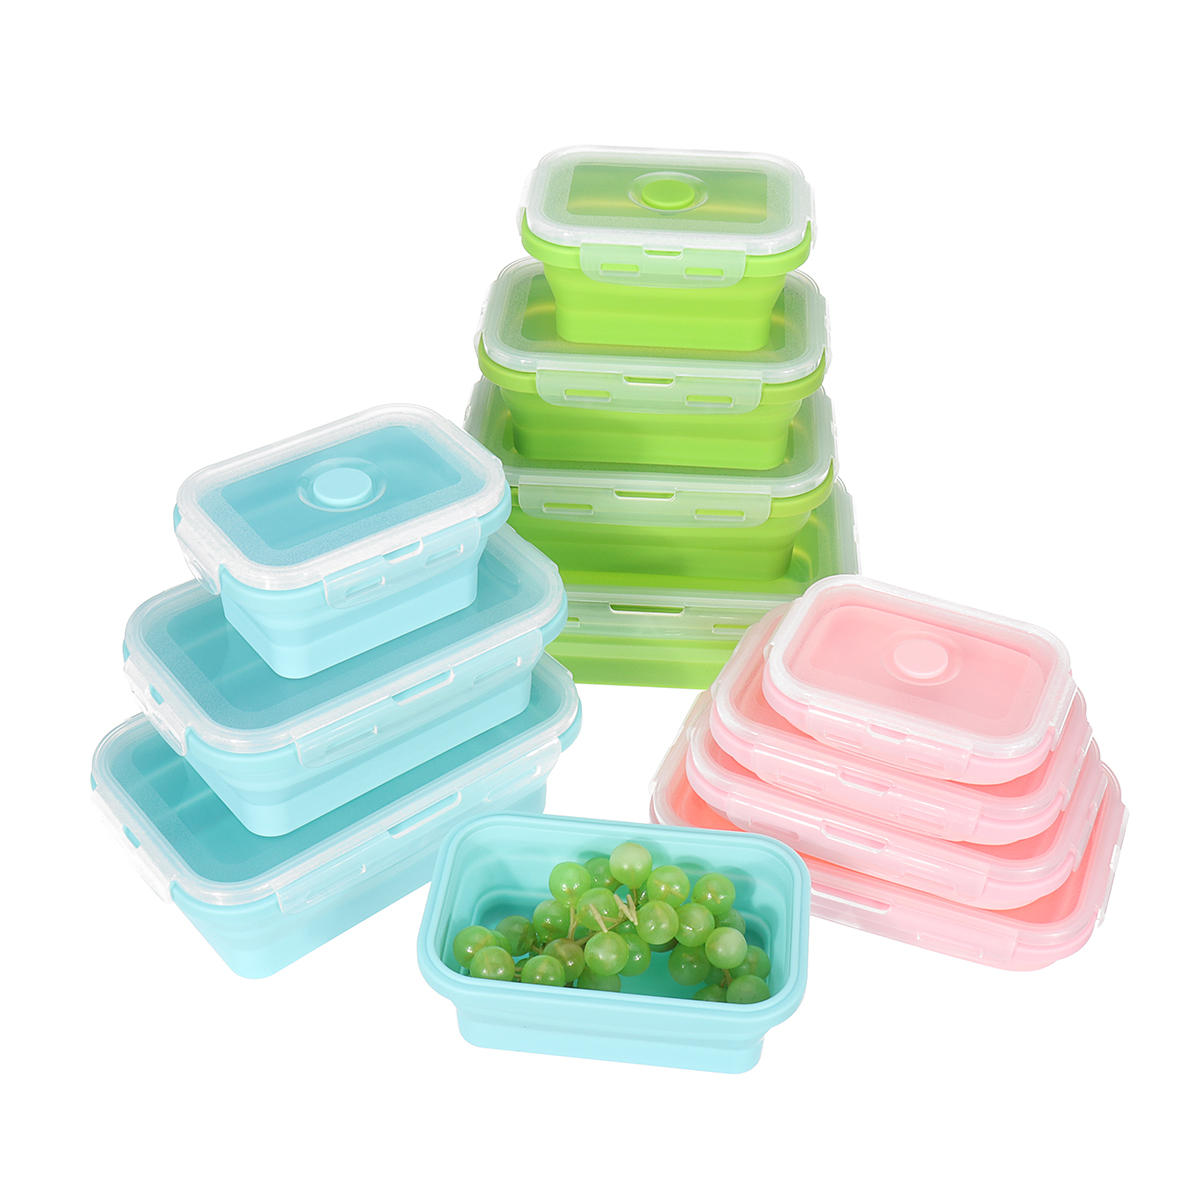 4 Pcs Set Folding Containers Silicone Food Storage Microwave Fridge Lunch Box